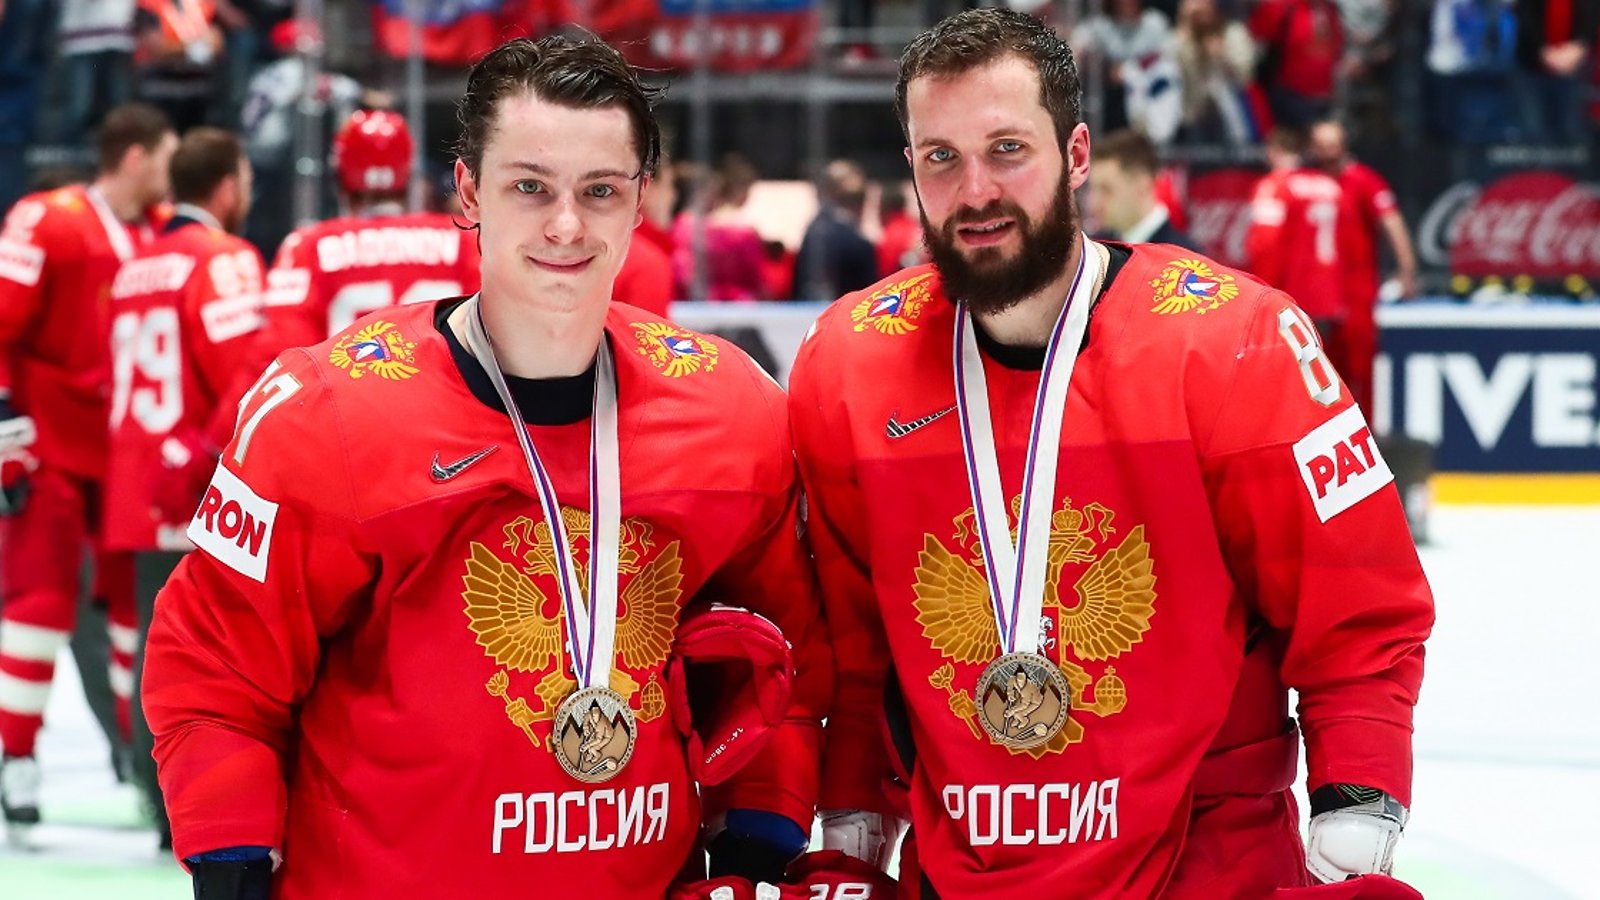 Rumor: KHL megastar on the verge of being traded to an NHL team.